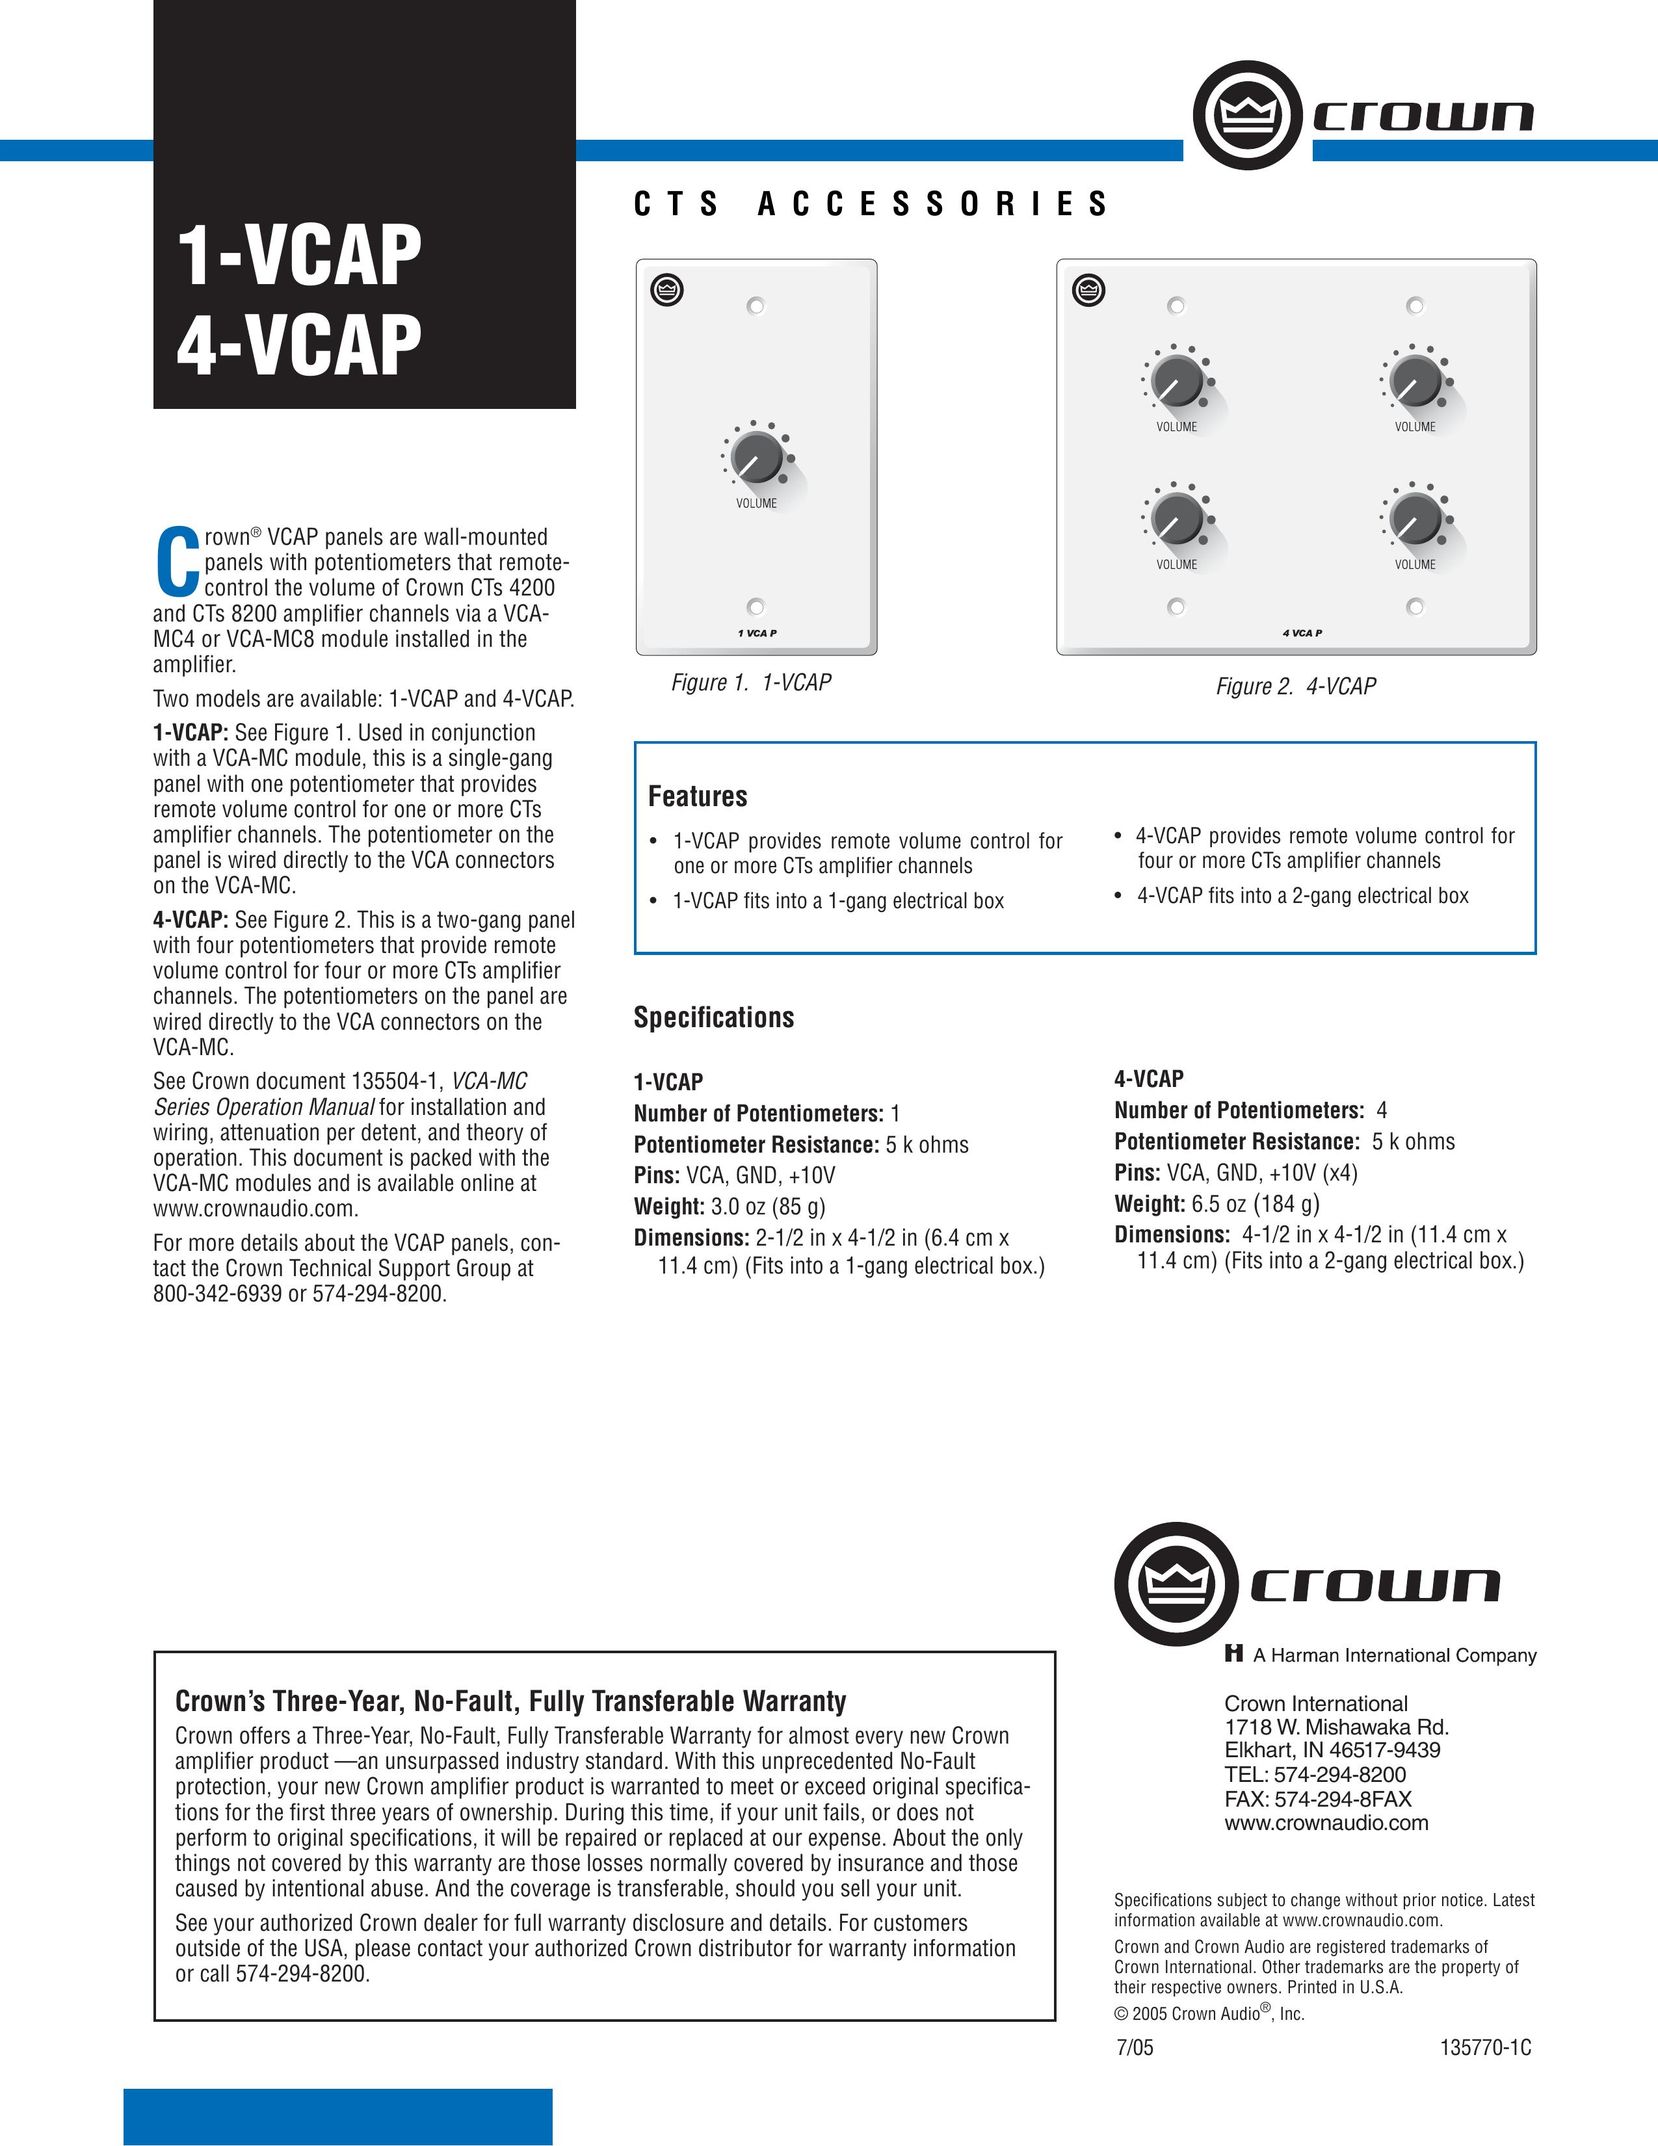 Crown Audio 1-VCAP Stereo Amplifier User Manual